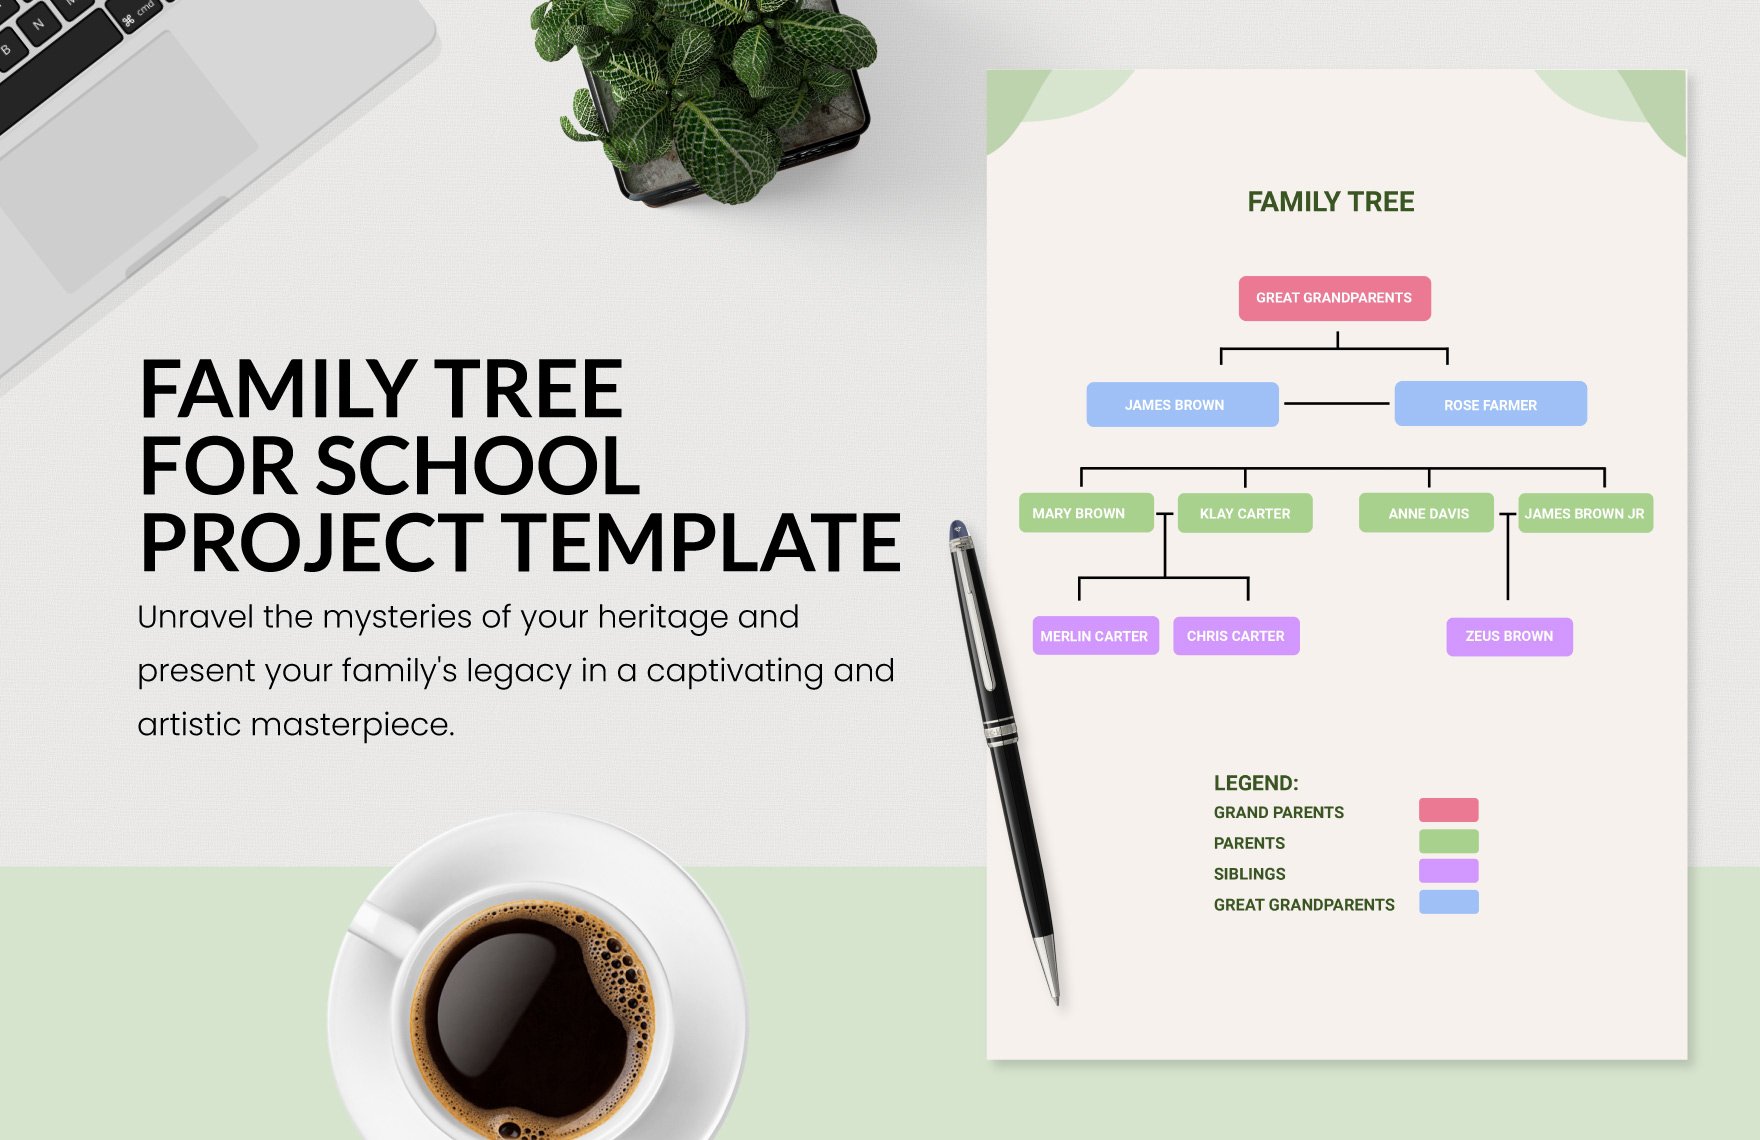 Family Tree for School Project Template